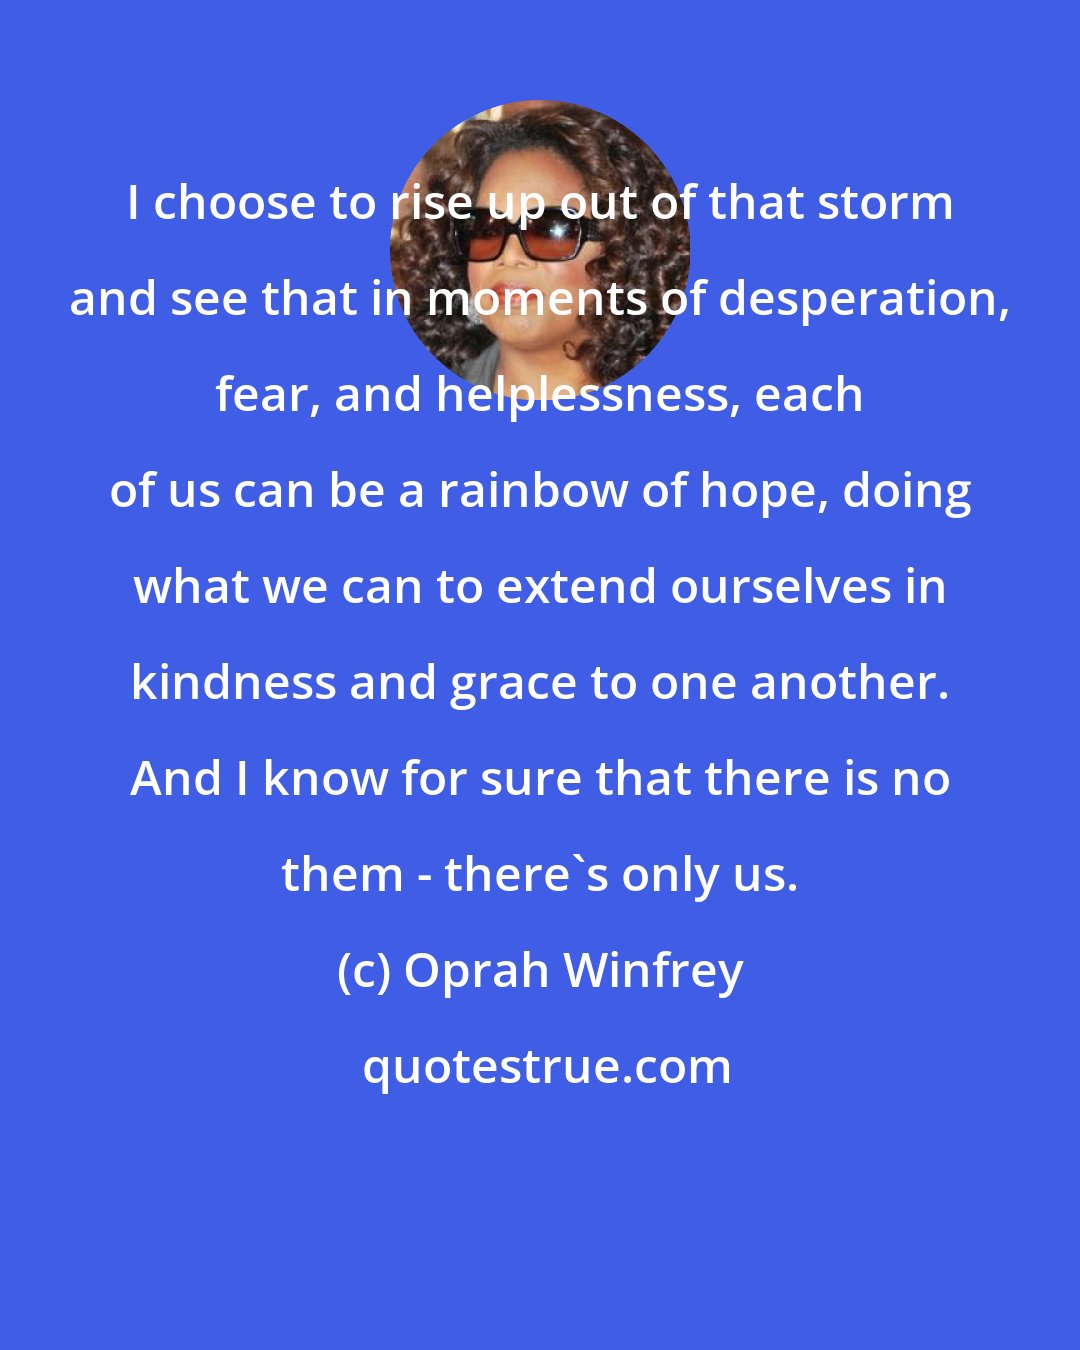 Oprah Winfrey: I choose to rise up out of that storm and see that in moments of desperation, fear, and helplessness, each of us can be a rainbow of hope, doing what we can to extend ourselves in kindness and grace to one another. And I know for sure that there is no them - there's only us.